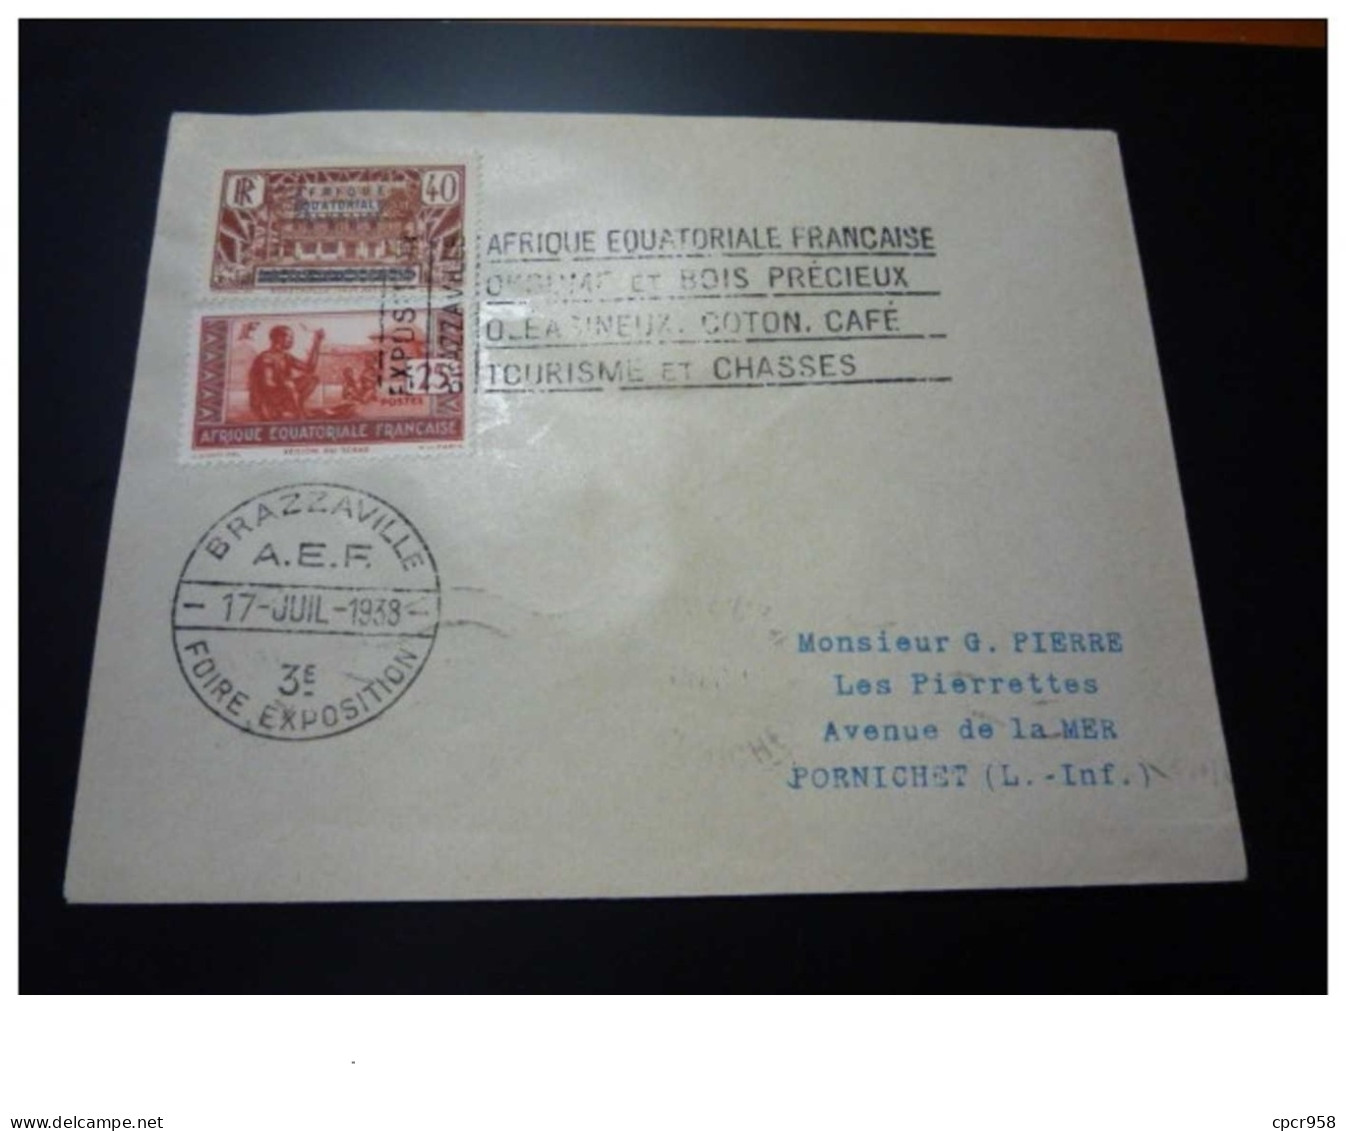 TIMBRE.n°29541.A E F.1938.TCHAD DAGUIN.BRAZAVILLE - Covers & Documents